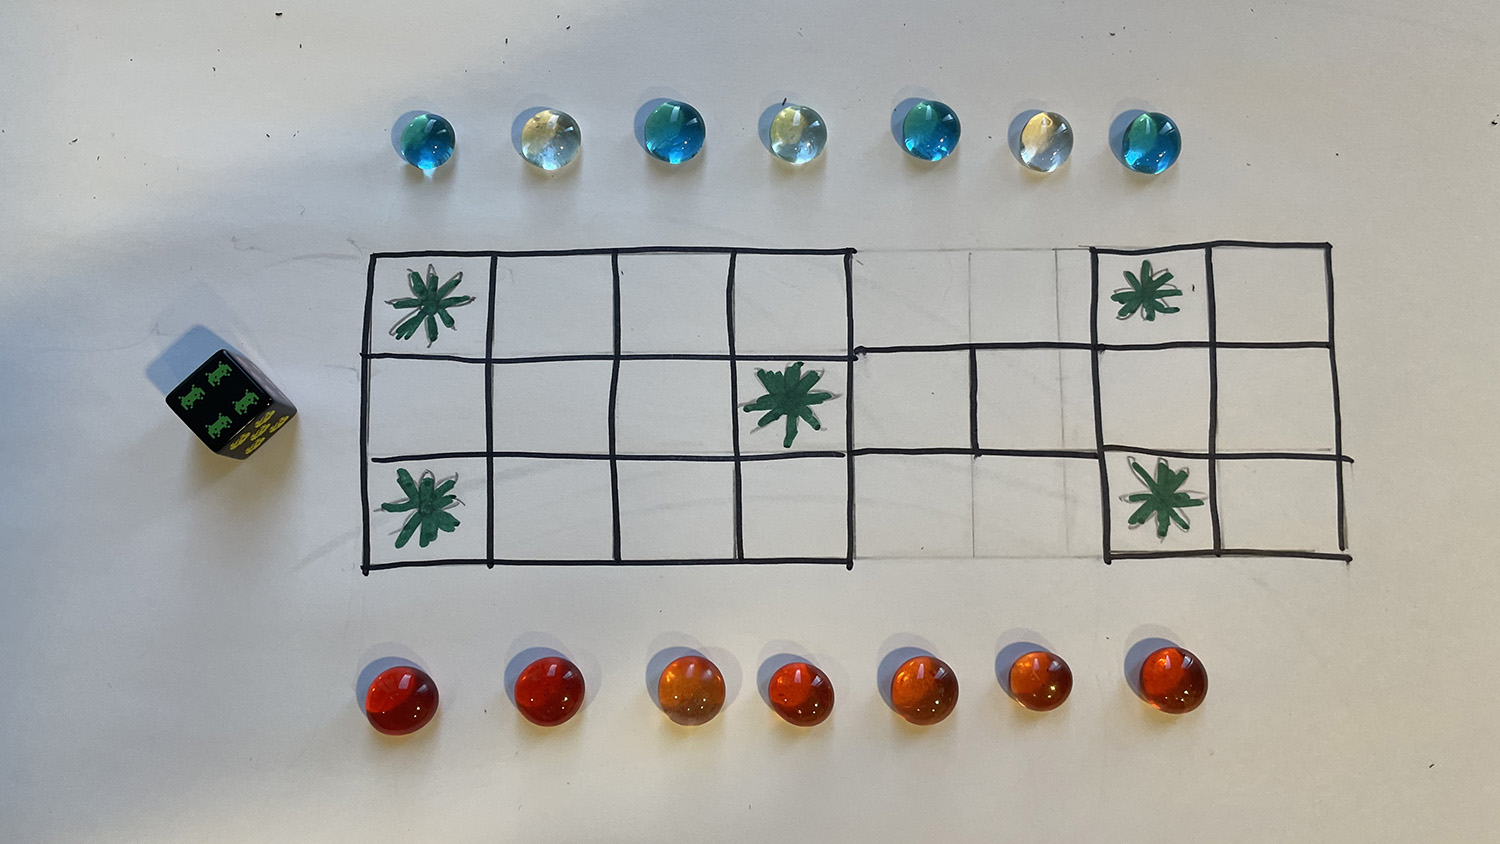 A paper board game with a die and two sets of stones